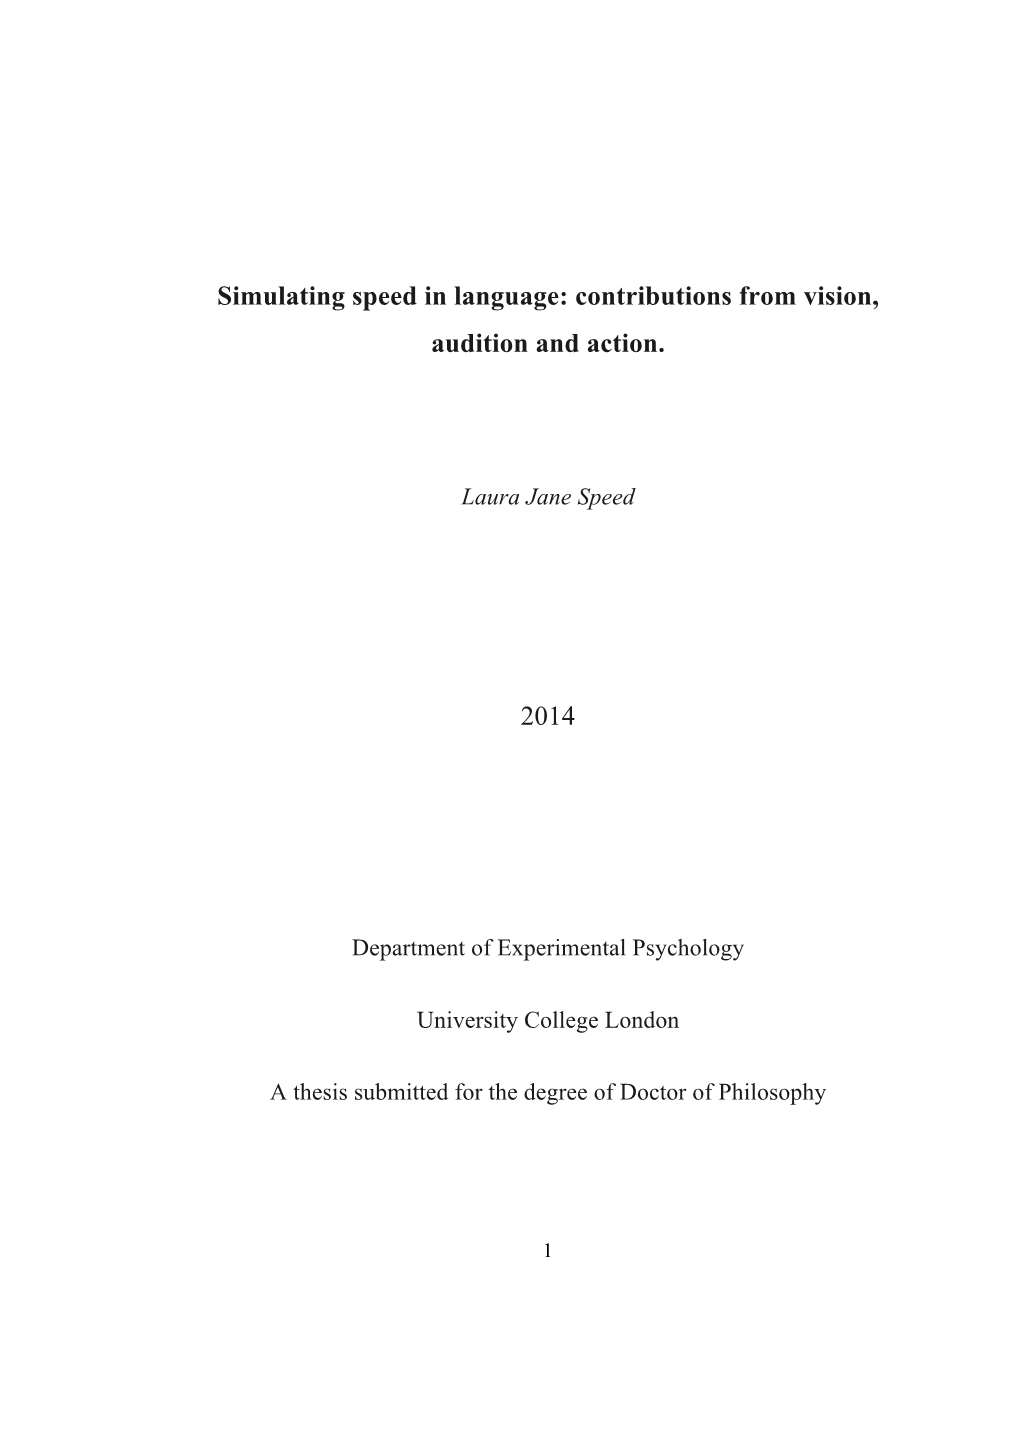 Simulating Speed in Language: Contributions from Vision, Audition and Action